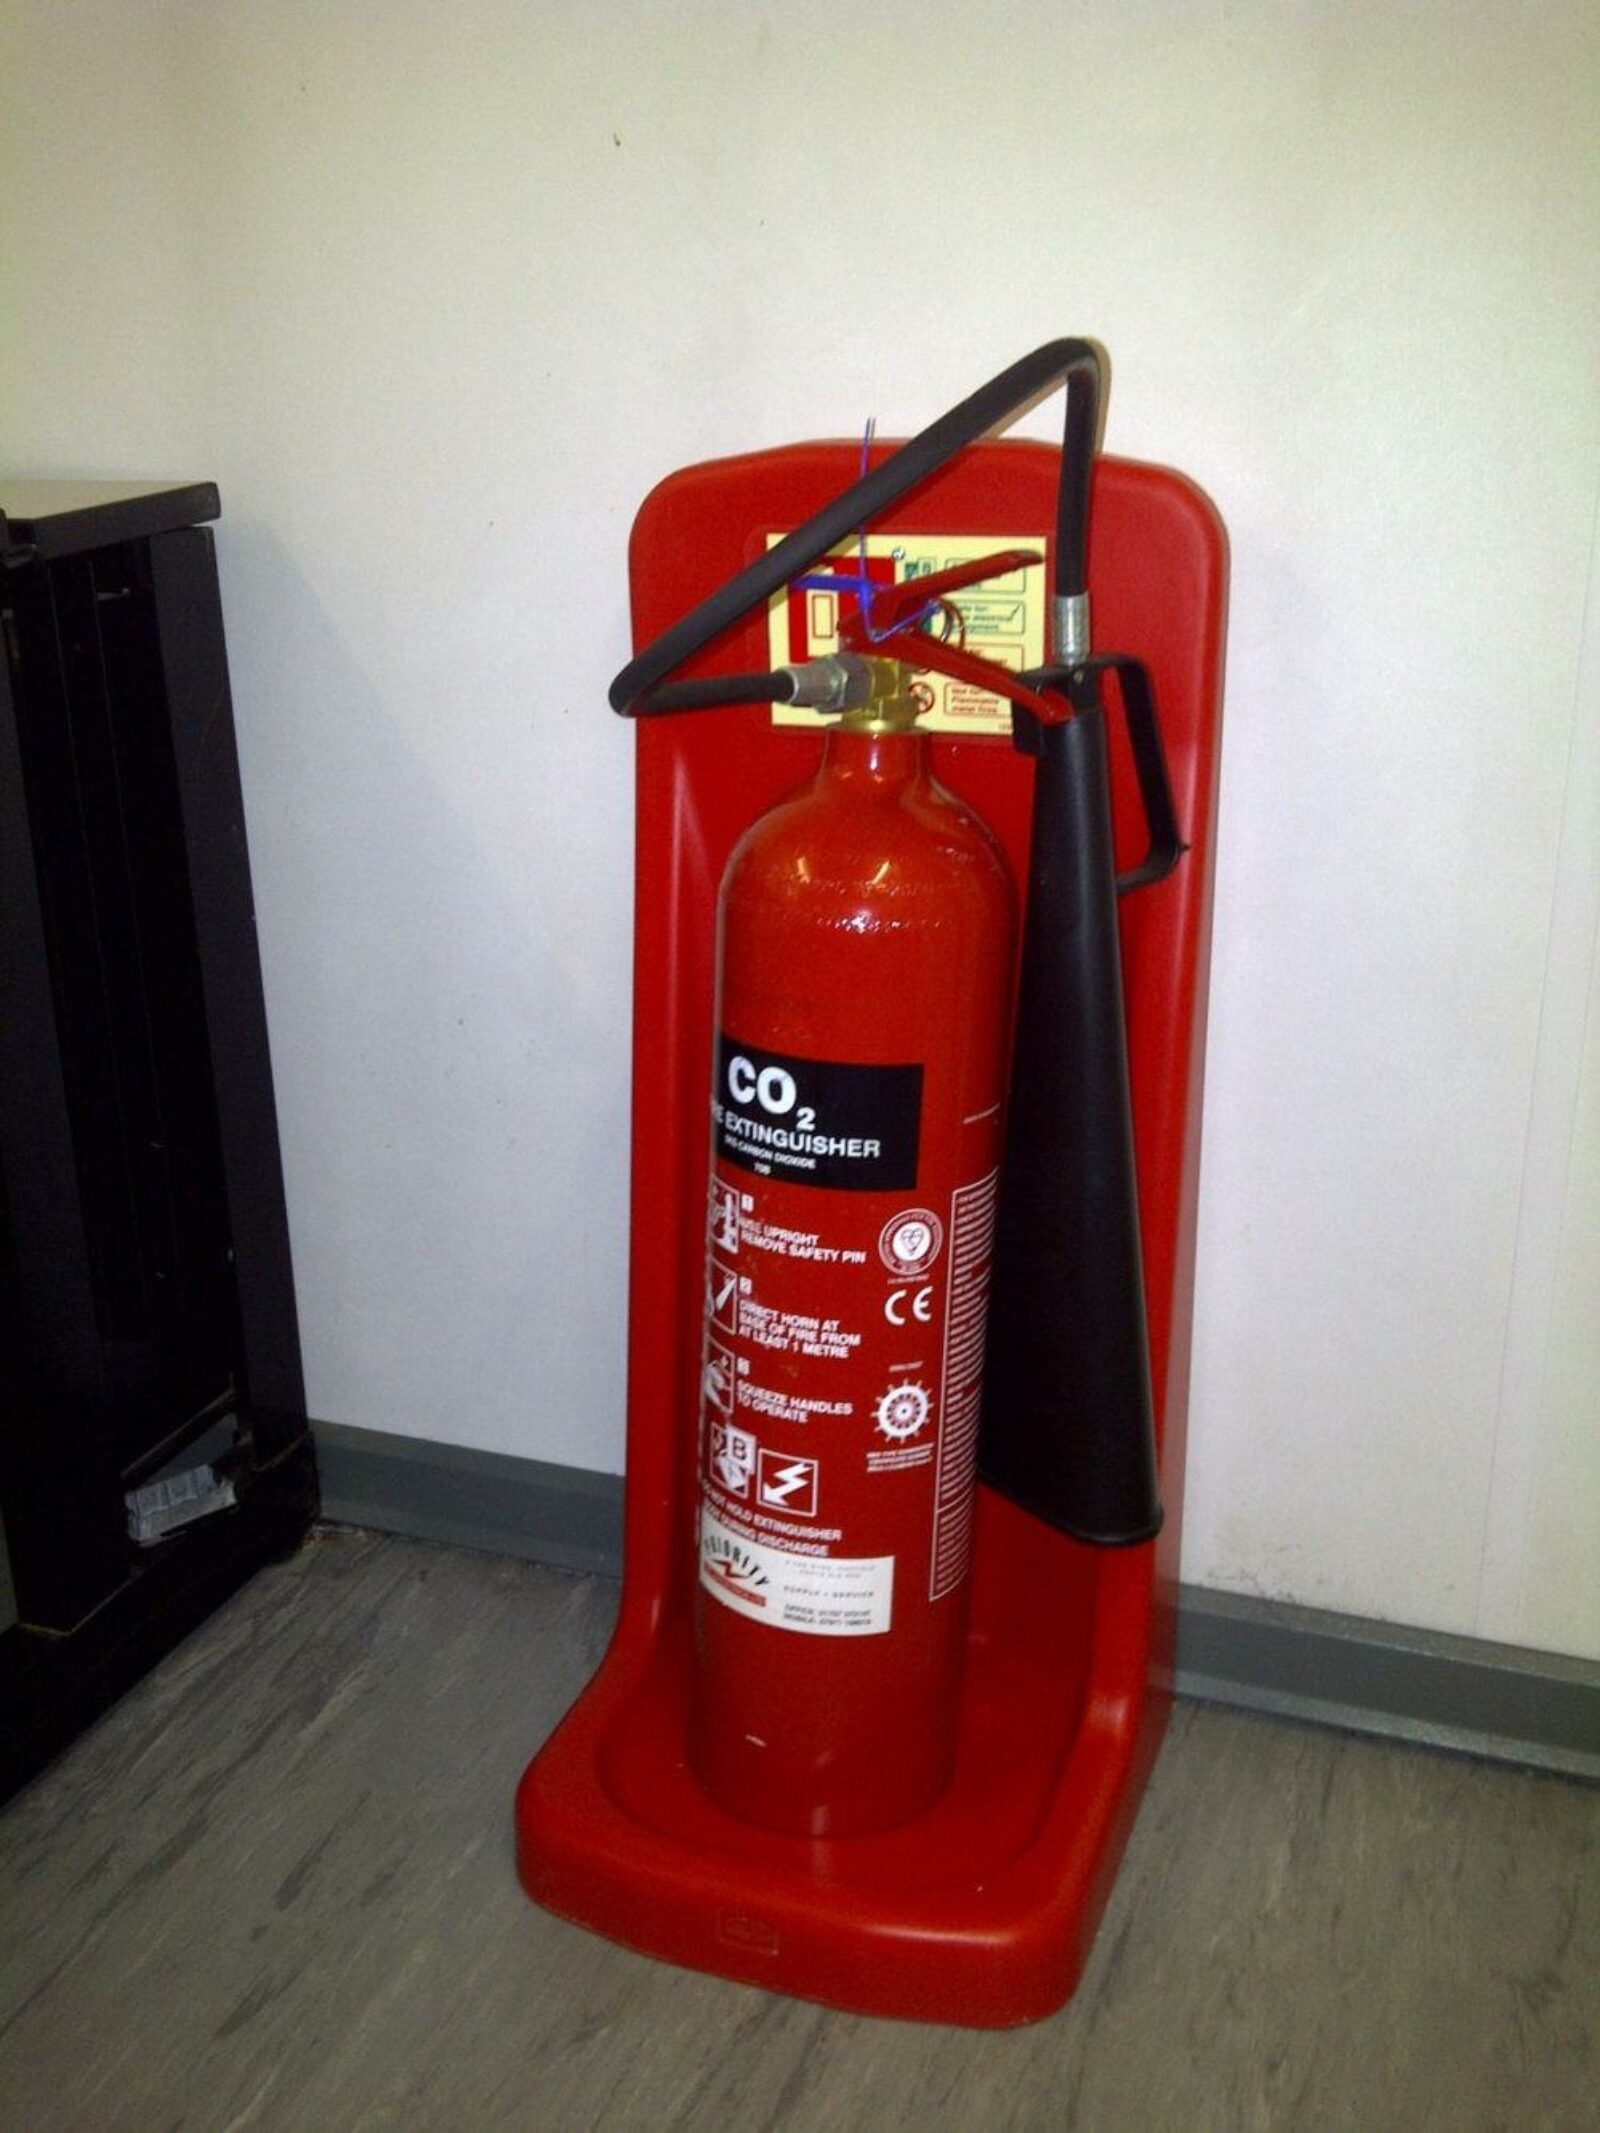 How to use a Co2 fire extinguisher